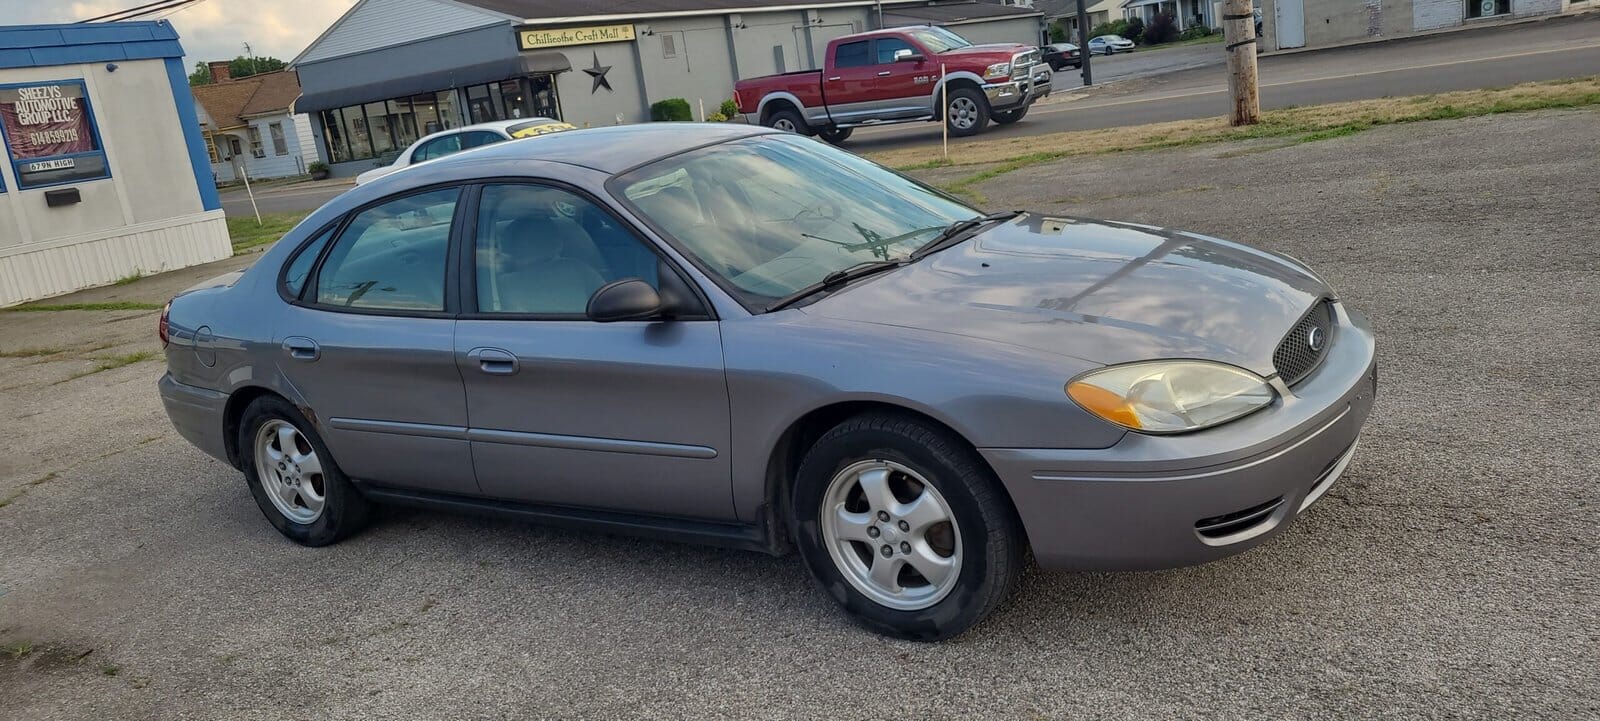 Read more about the article ***SOLD***Ford Taurus***SOLD***